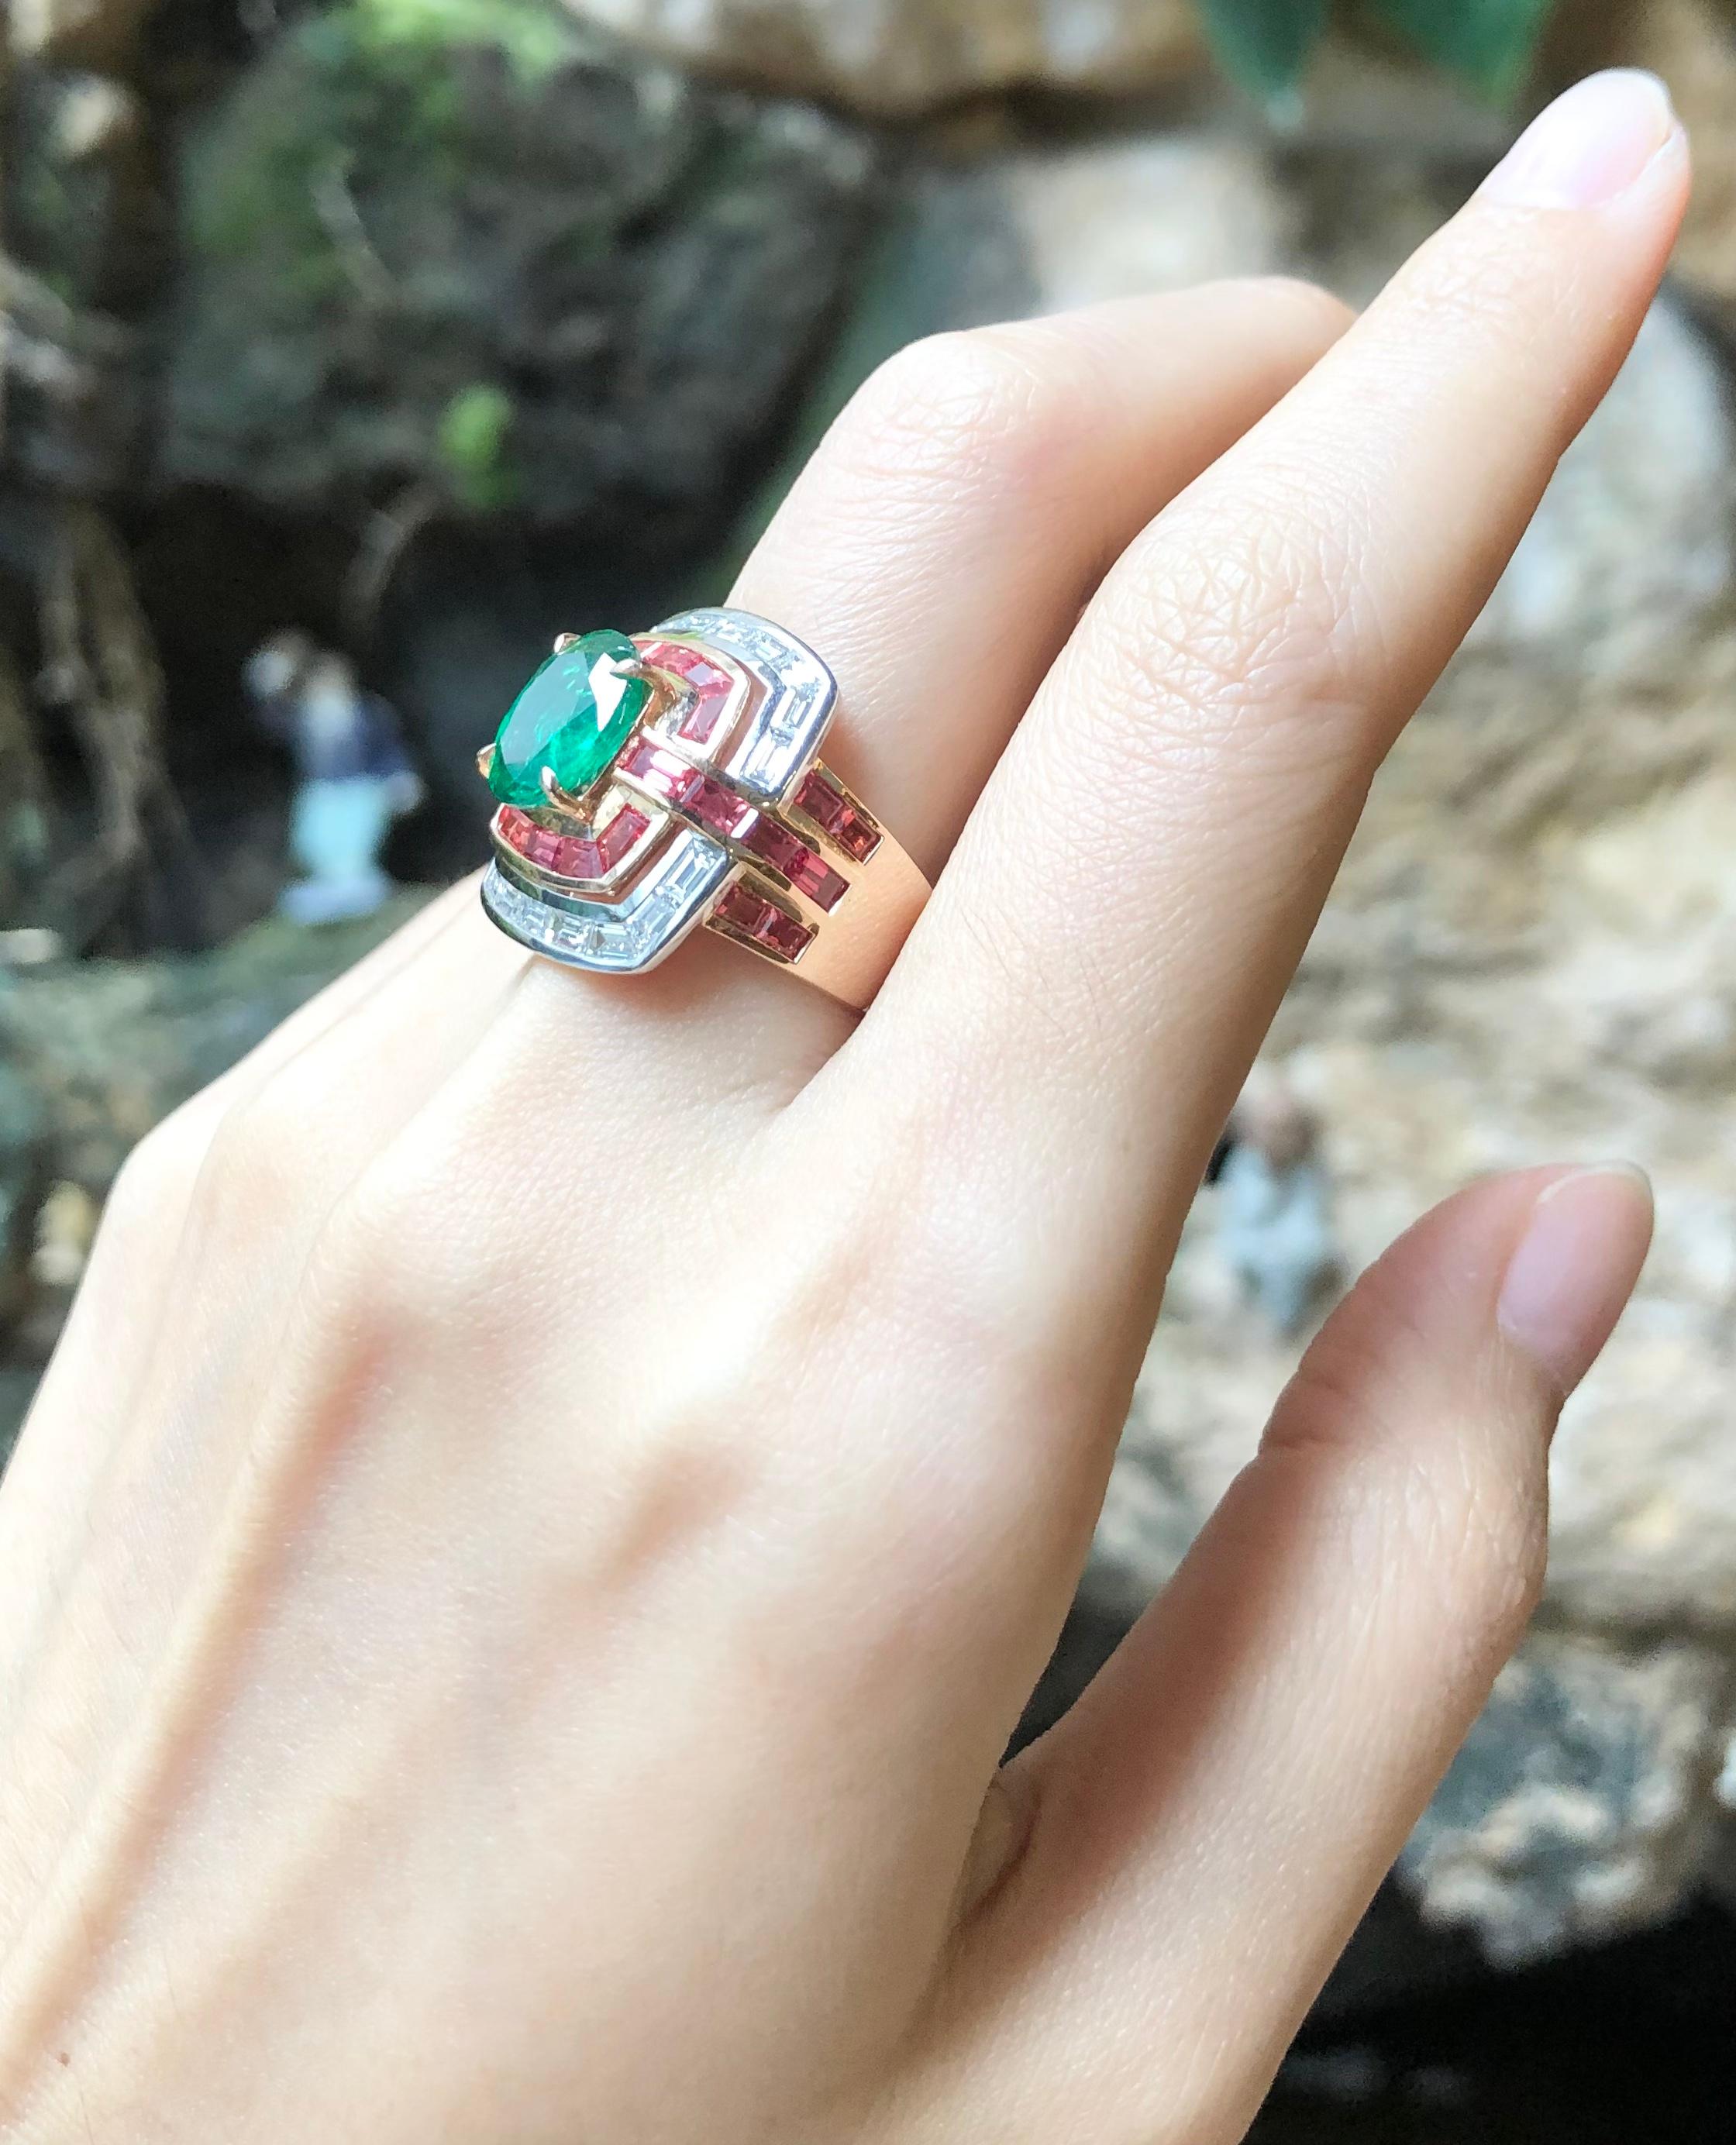 Emerald 2.30 carats with Orange Sapphire 2.91 carats and Diamond 1.09 carats Ring set in 18 Karat Rose Gold Settings

Width:  1.7 cm 
Length: 2.1 cm
Ring Size: 54
Total Weight: 11.27 grams

Emerald 
Width:  0.7 cm 
Length: 1.0 cm

